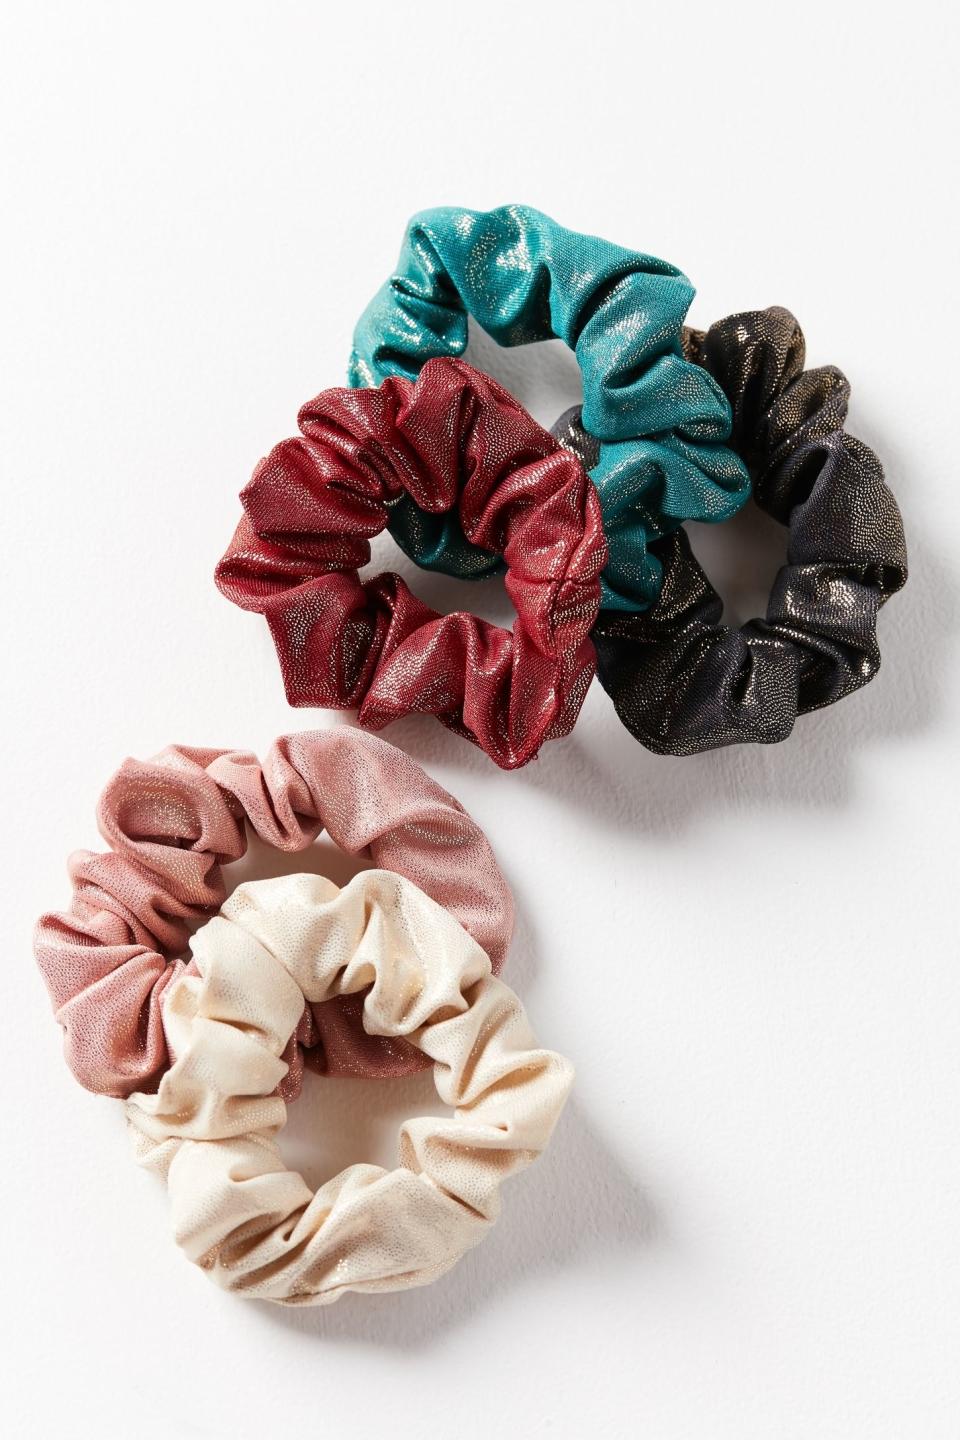 Urban Outfitters Days Of The Week Indigo Scrunchie Set, $10